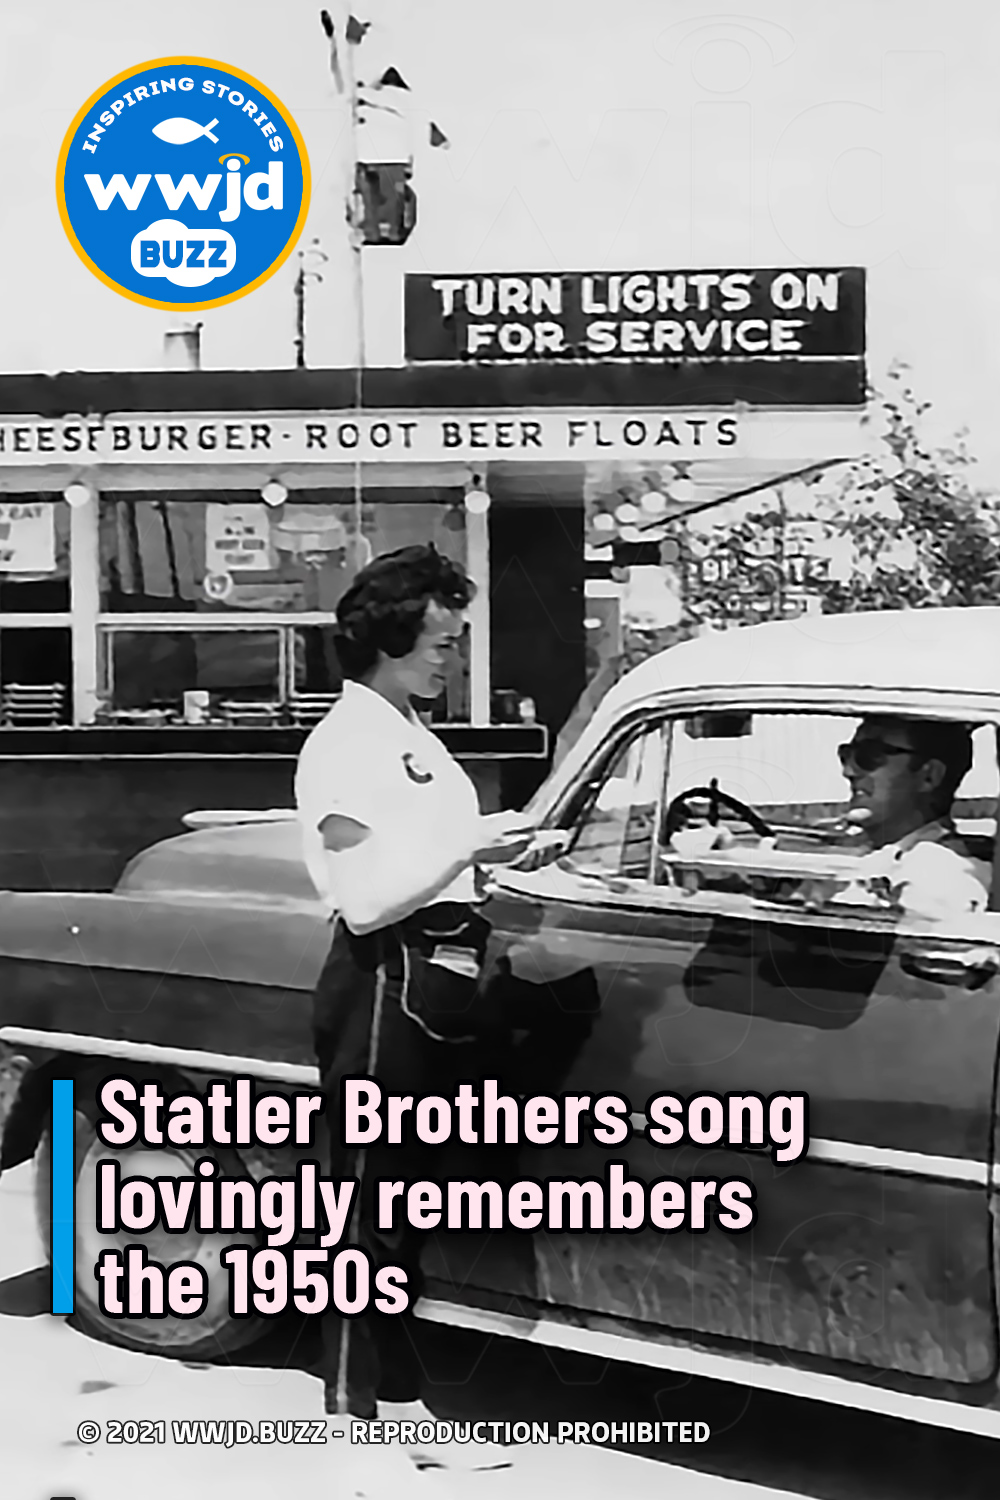 Statler Brothers song lovingly remembers the 1950s